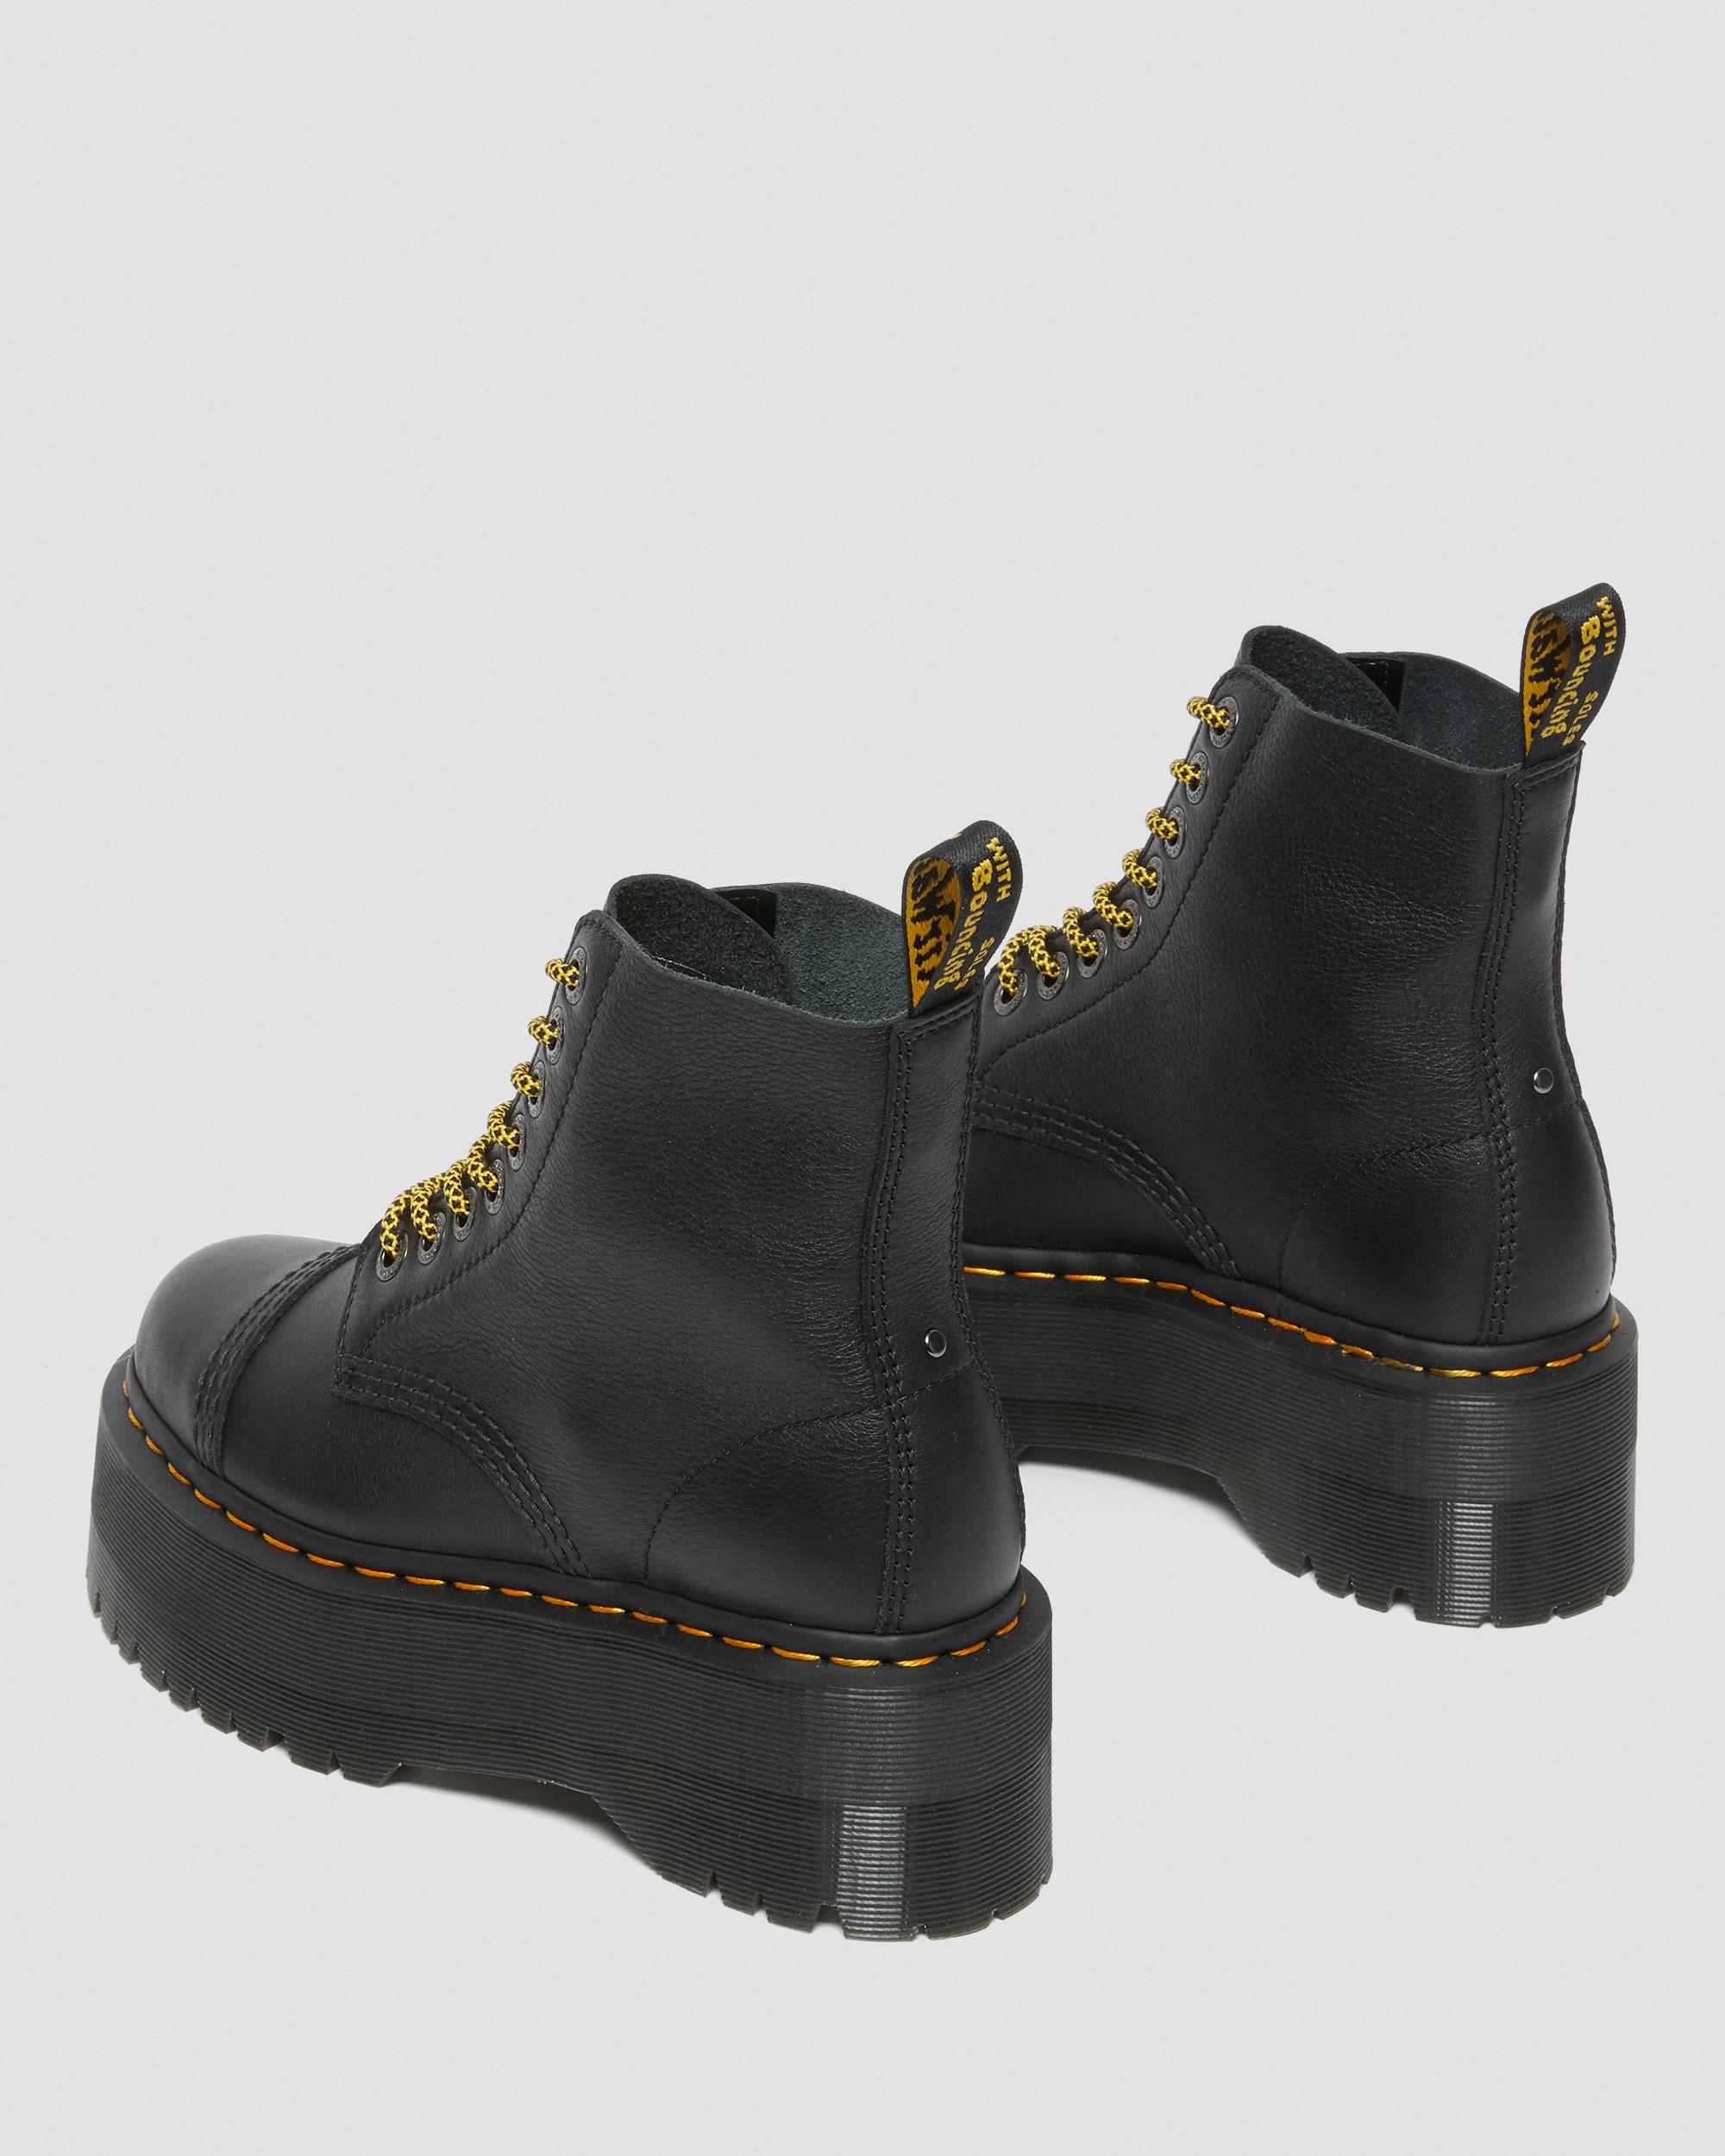 Sinclair Max Pisa Leather Platform Boots in Black